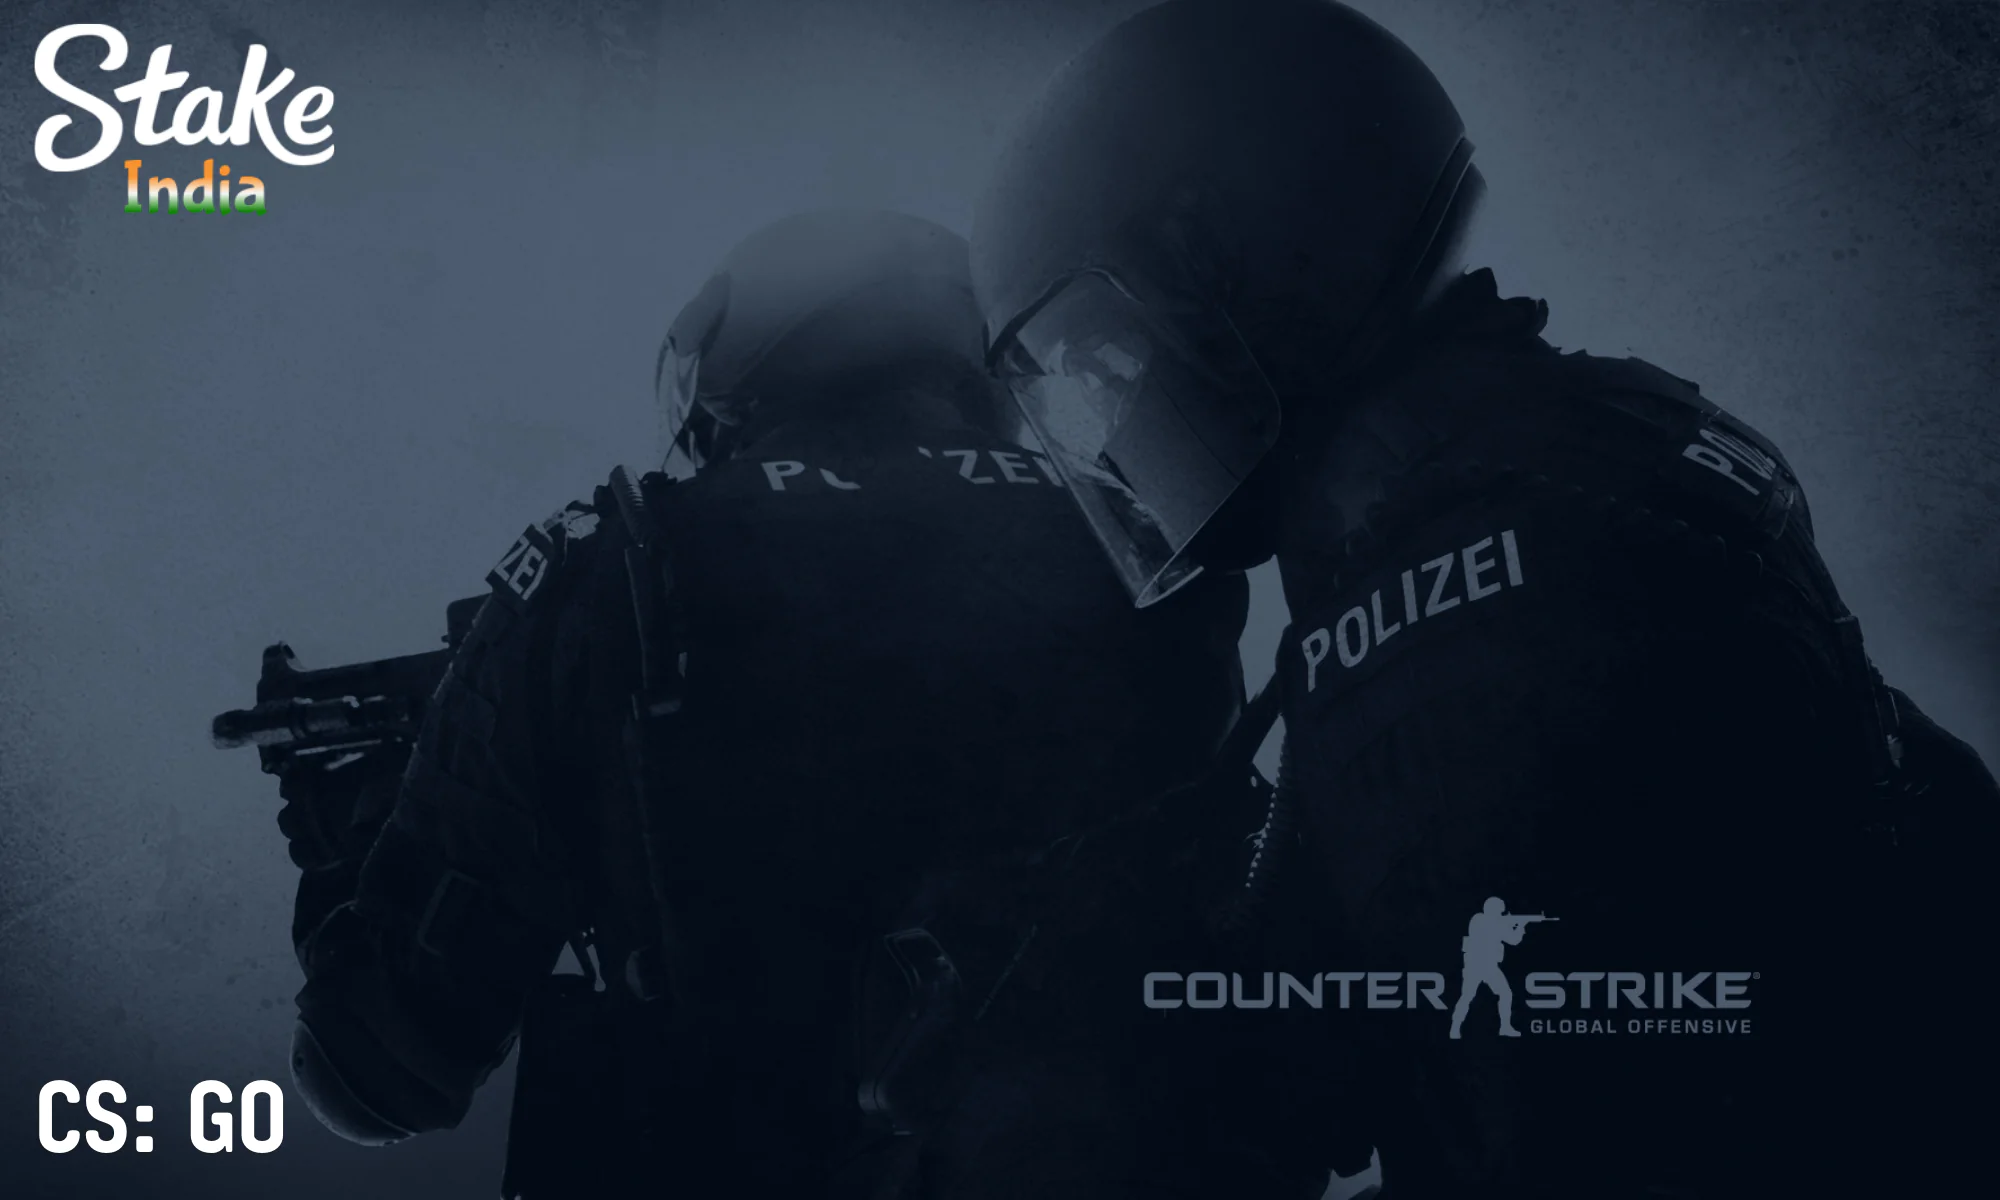 Stake offers a wide variety of the most popular international and national Counter-Strike competitions